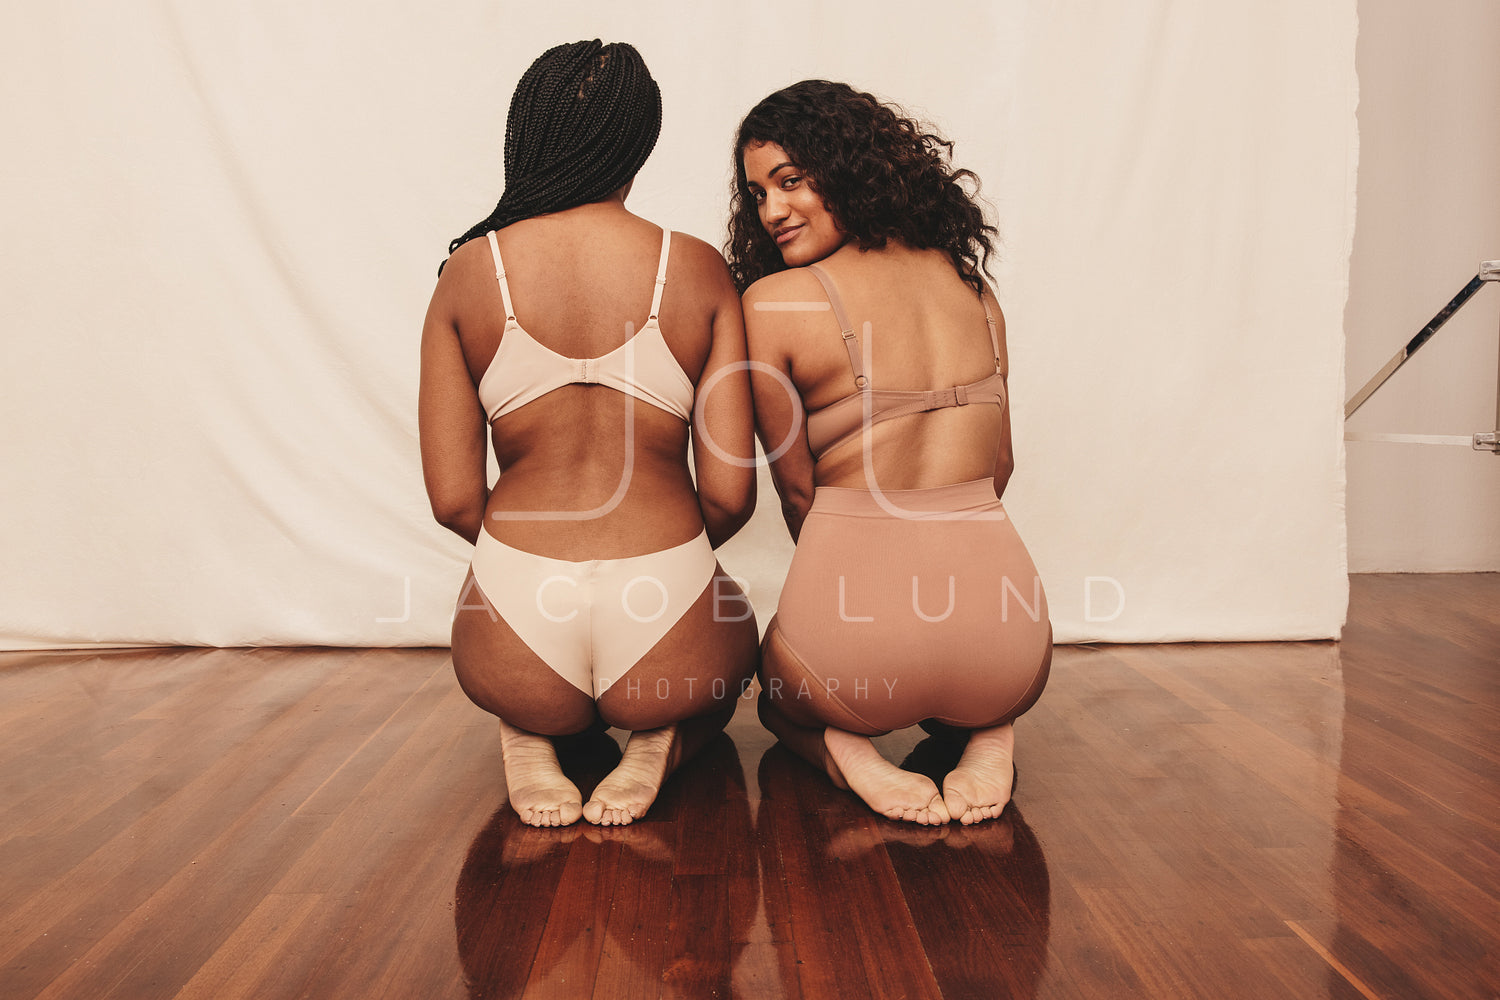 Two confident young women kneeling in underwear – Jacob Lund